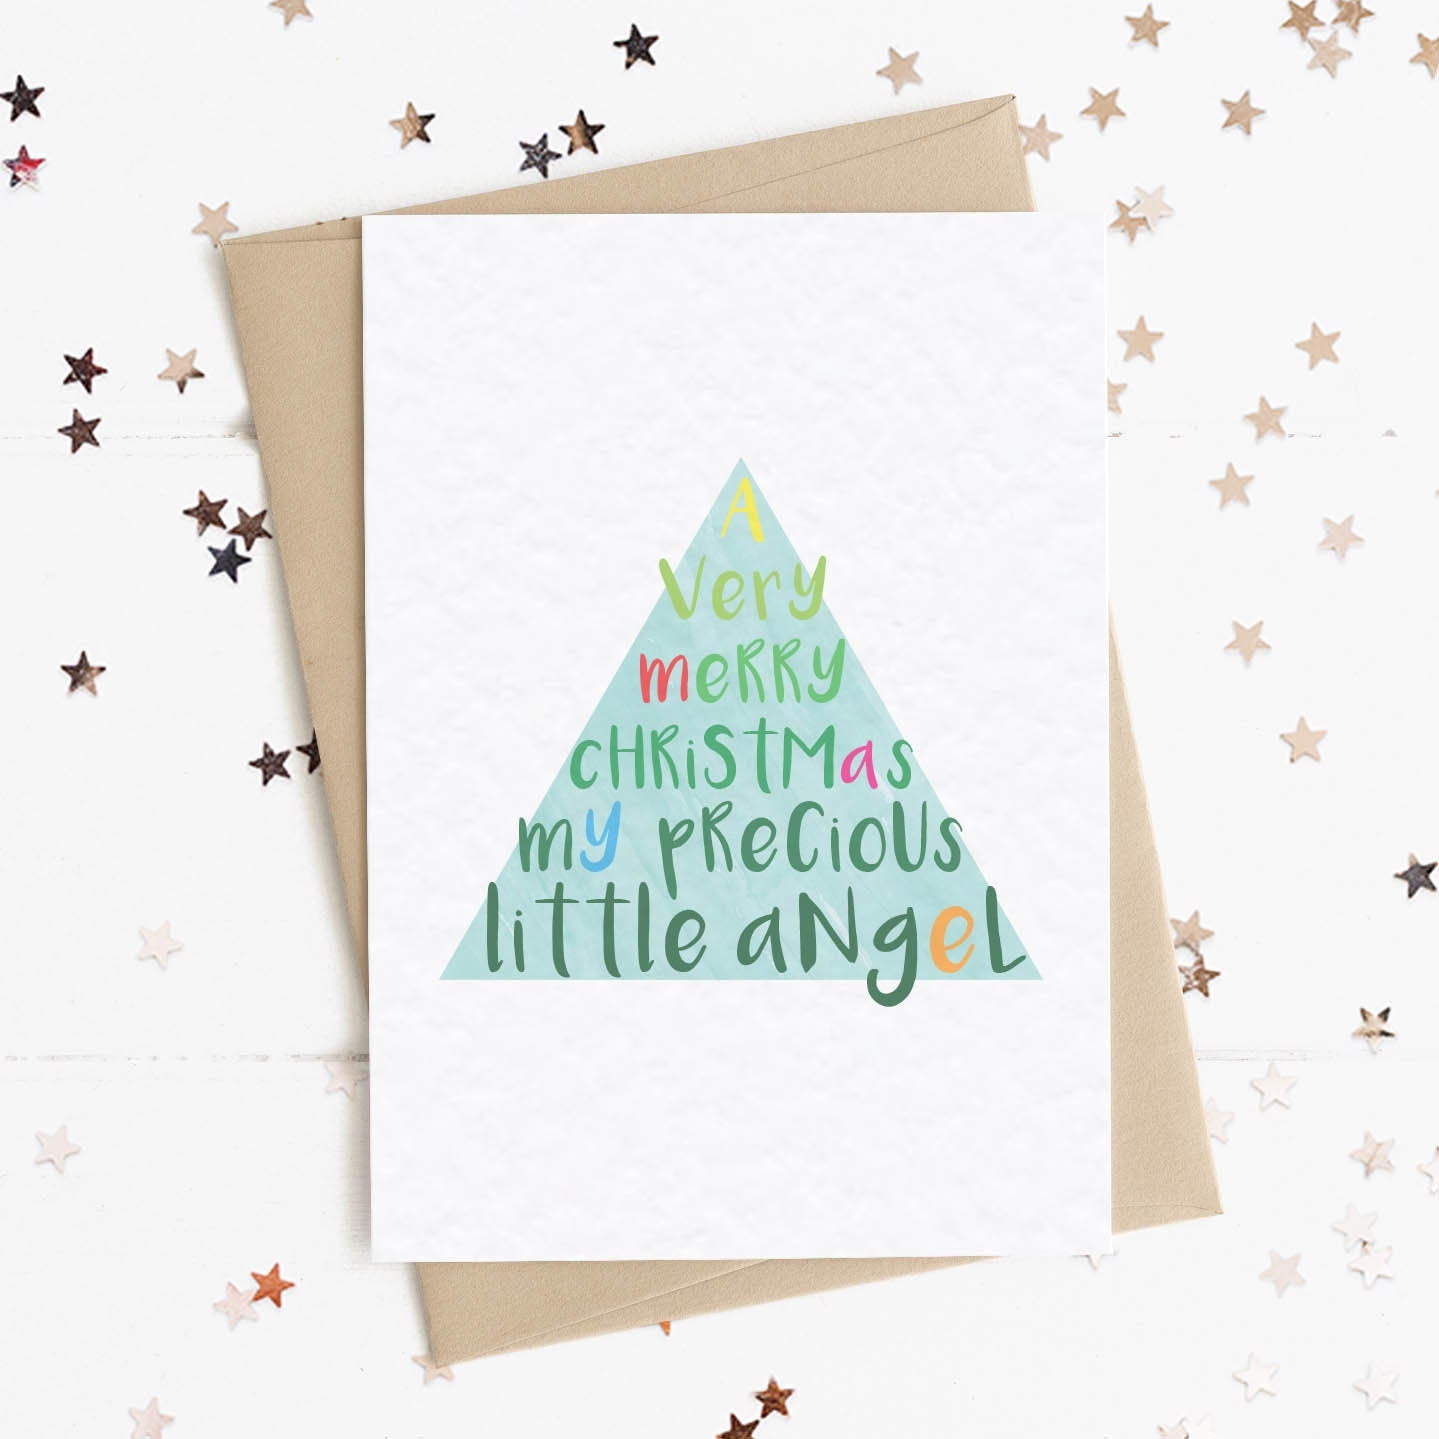 A fun and thoughtful card in festive Christmas tree design and colours with the message "A Very Merry Christmas My Precious Little Angel".